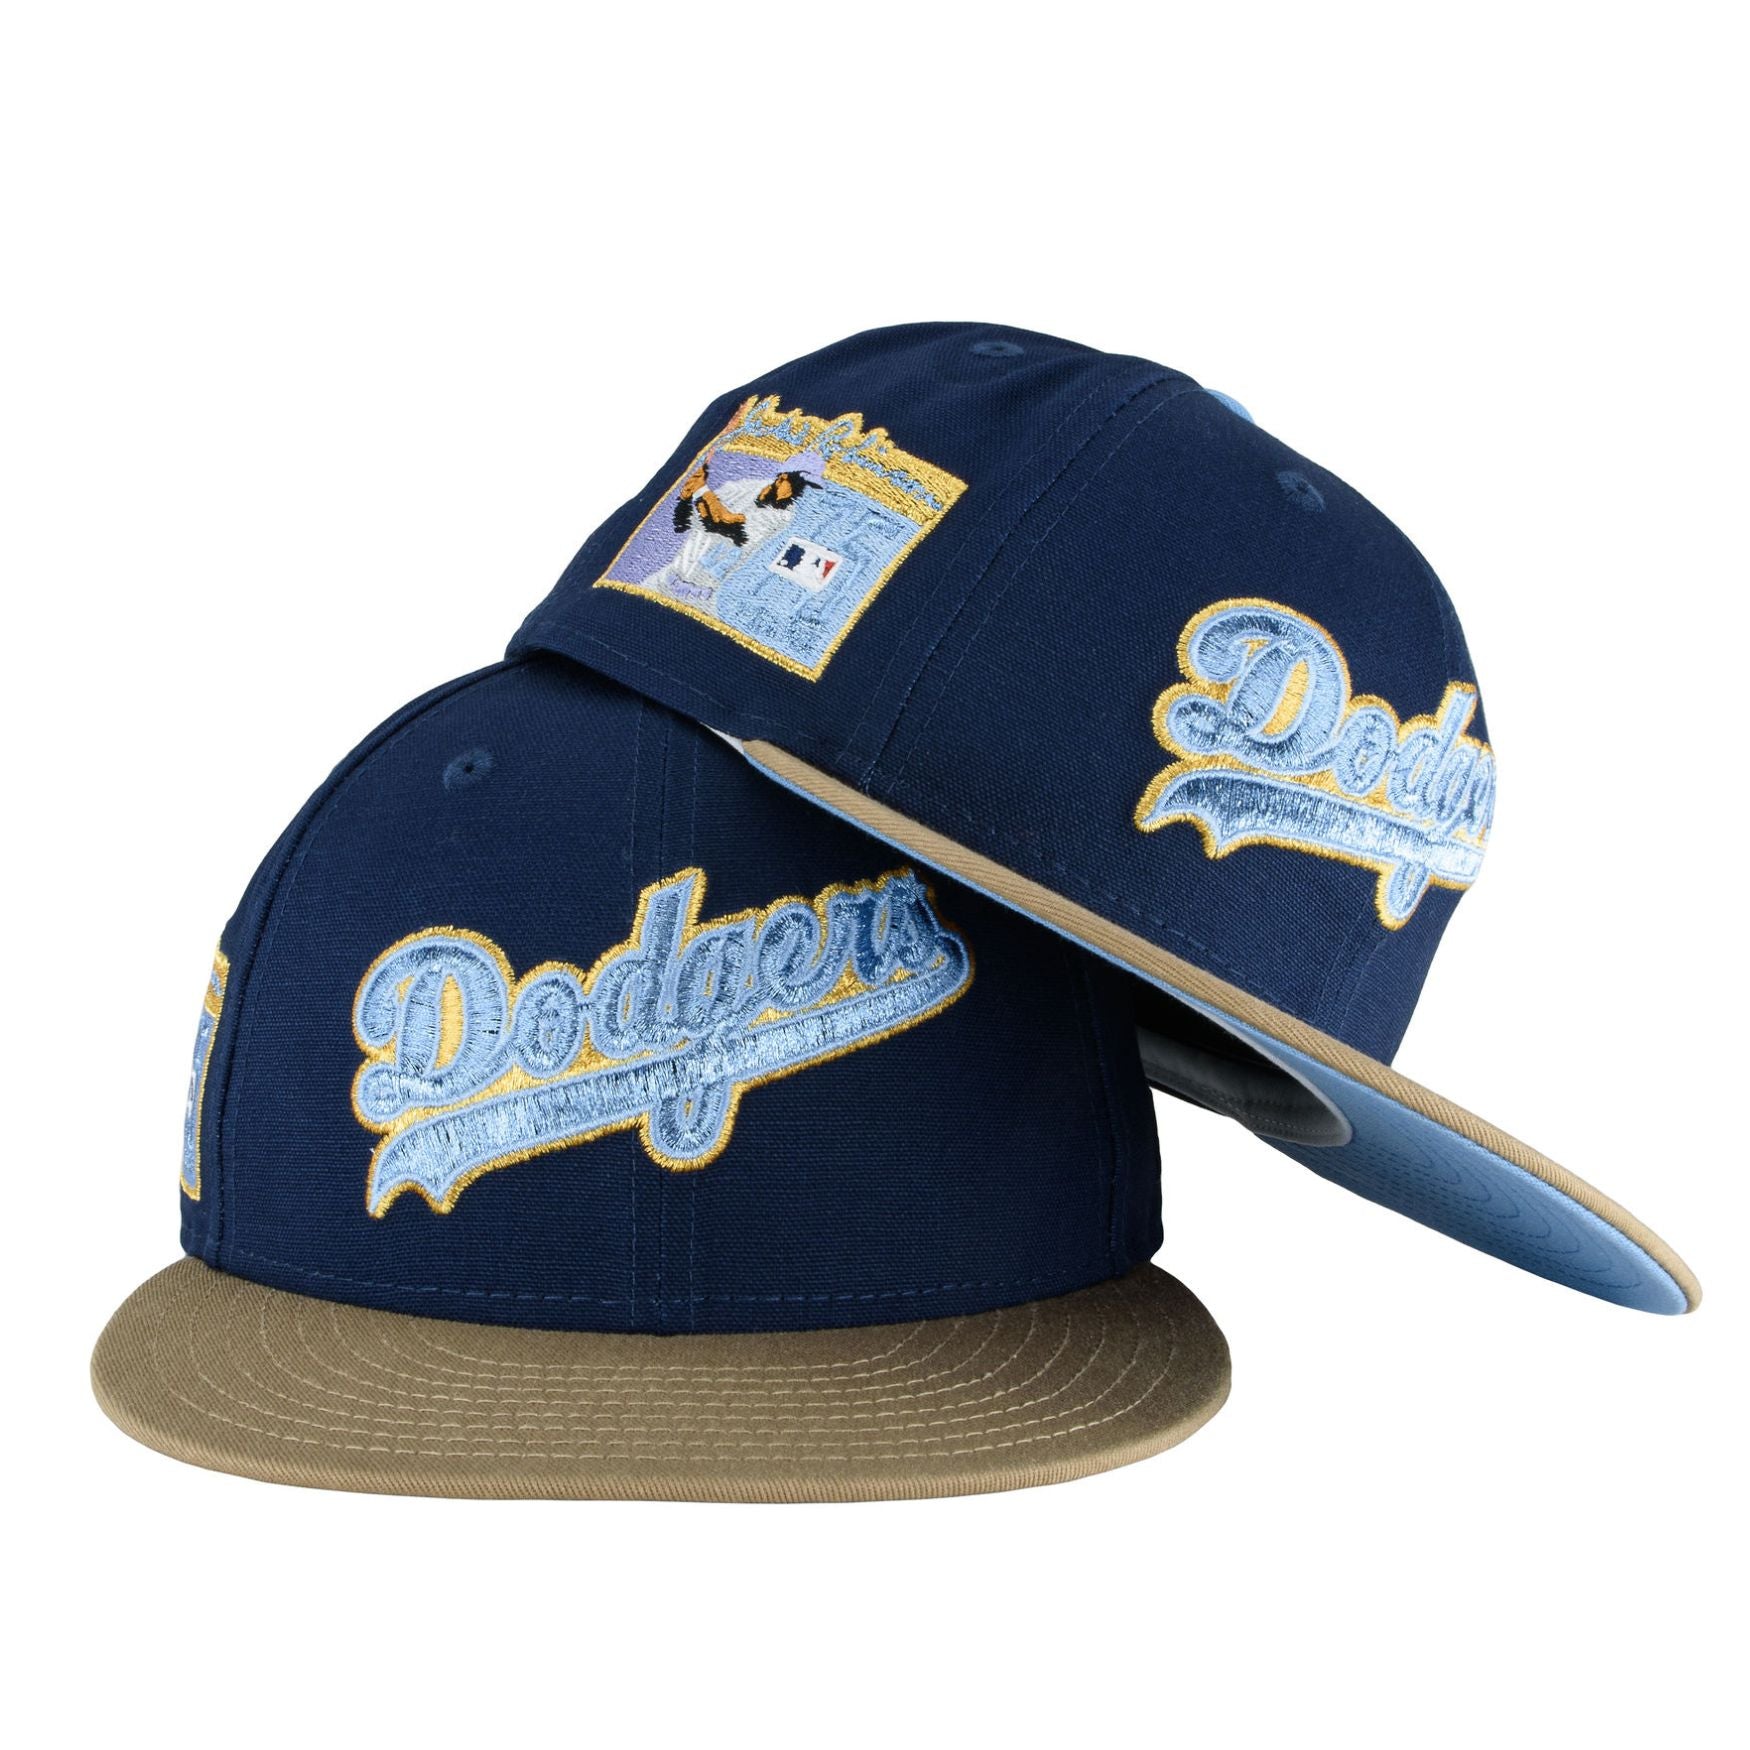 Los Angeles Dodgers METALLIC LOGO SIDE-PATCH Black Fitted Hat